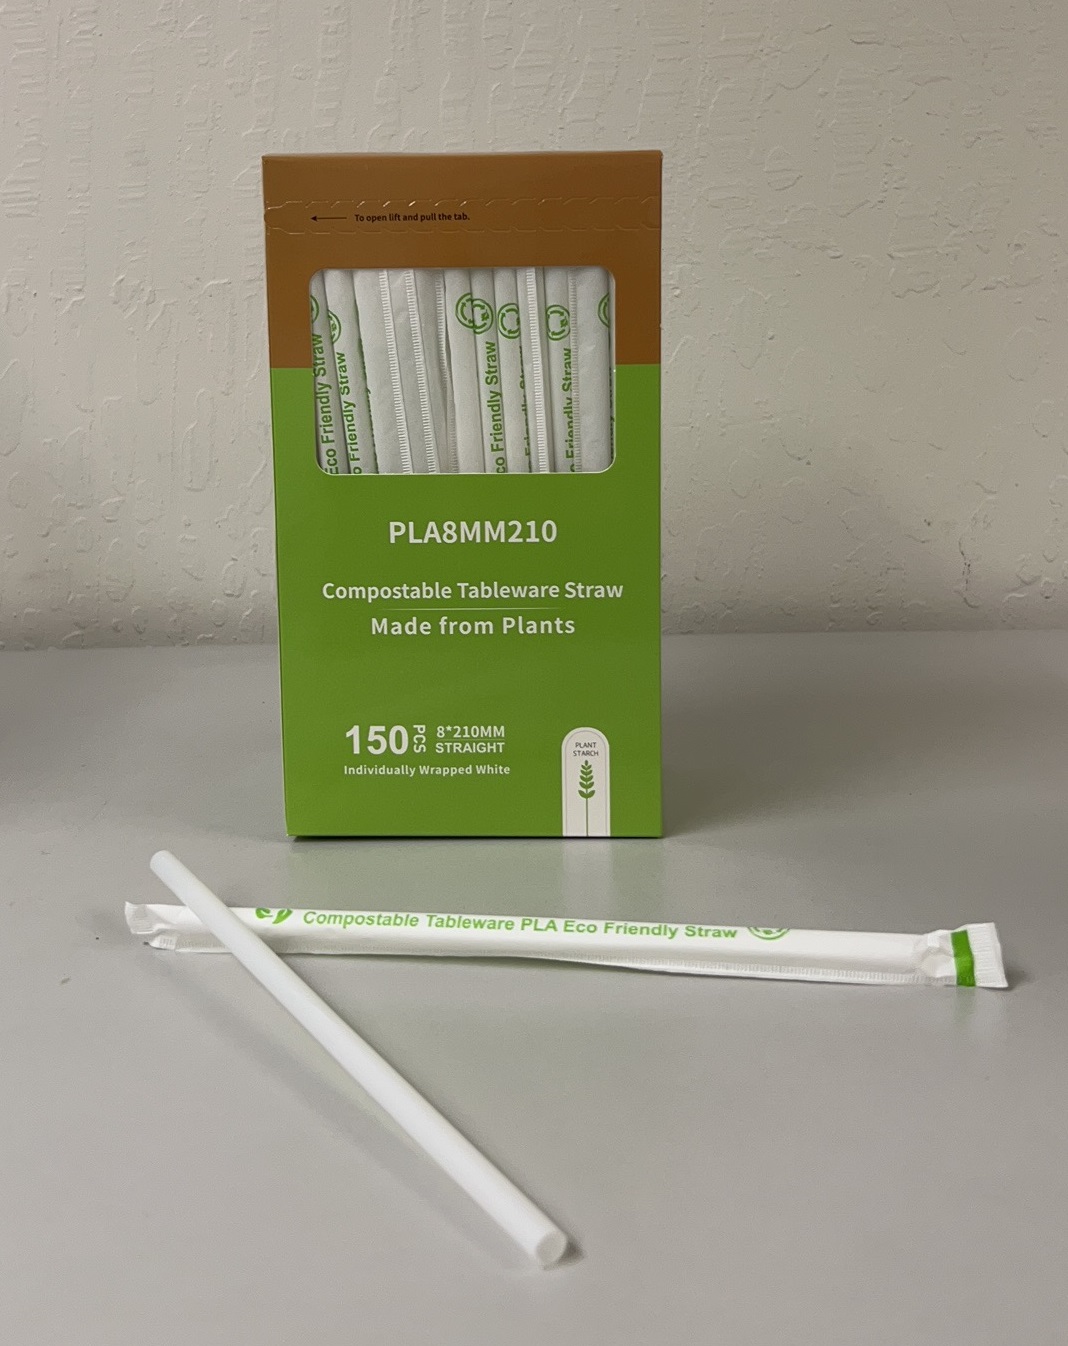 PLA8MM210, 8.27&quot; GIANT PLA
PLASTIC STRAWS  WITH
INDIVIDUALLY PAPER WRAPPED,
COMPOSTABLE,  150/BOX,
20BOX/CS